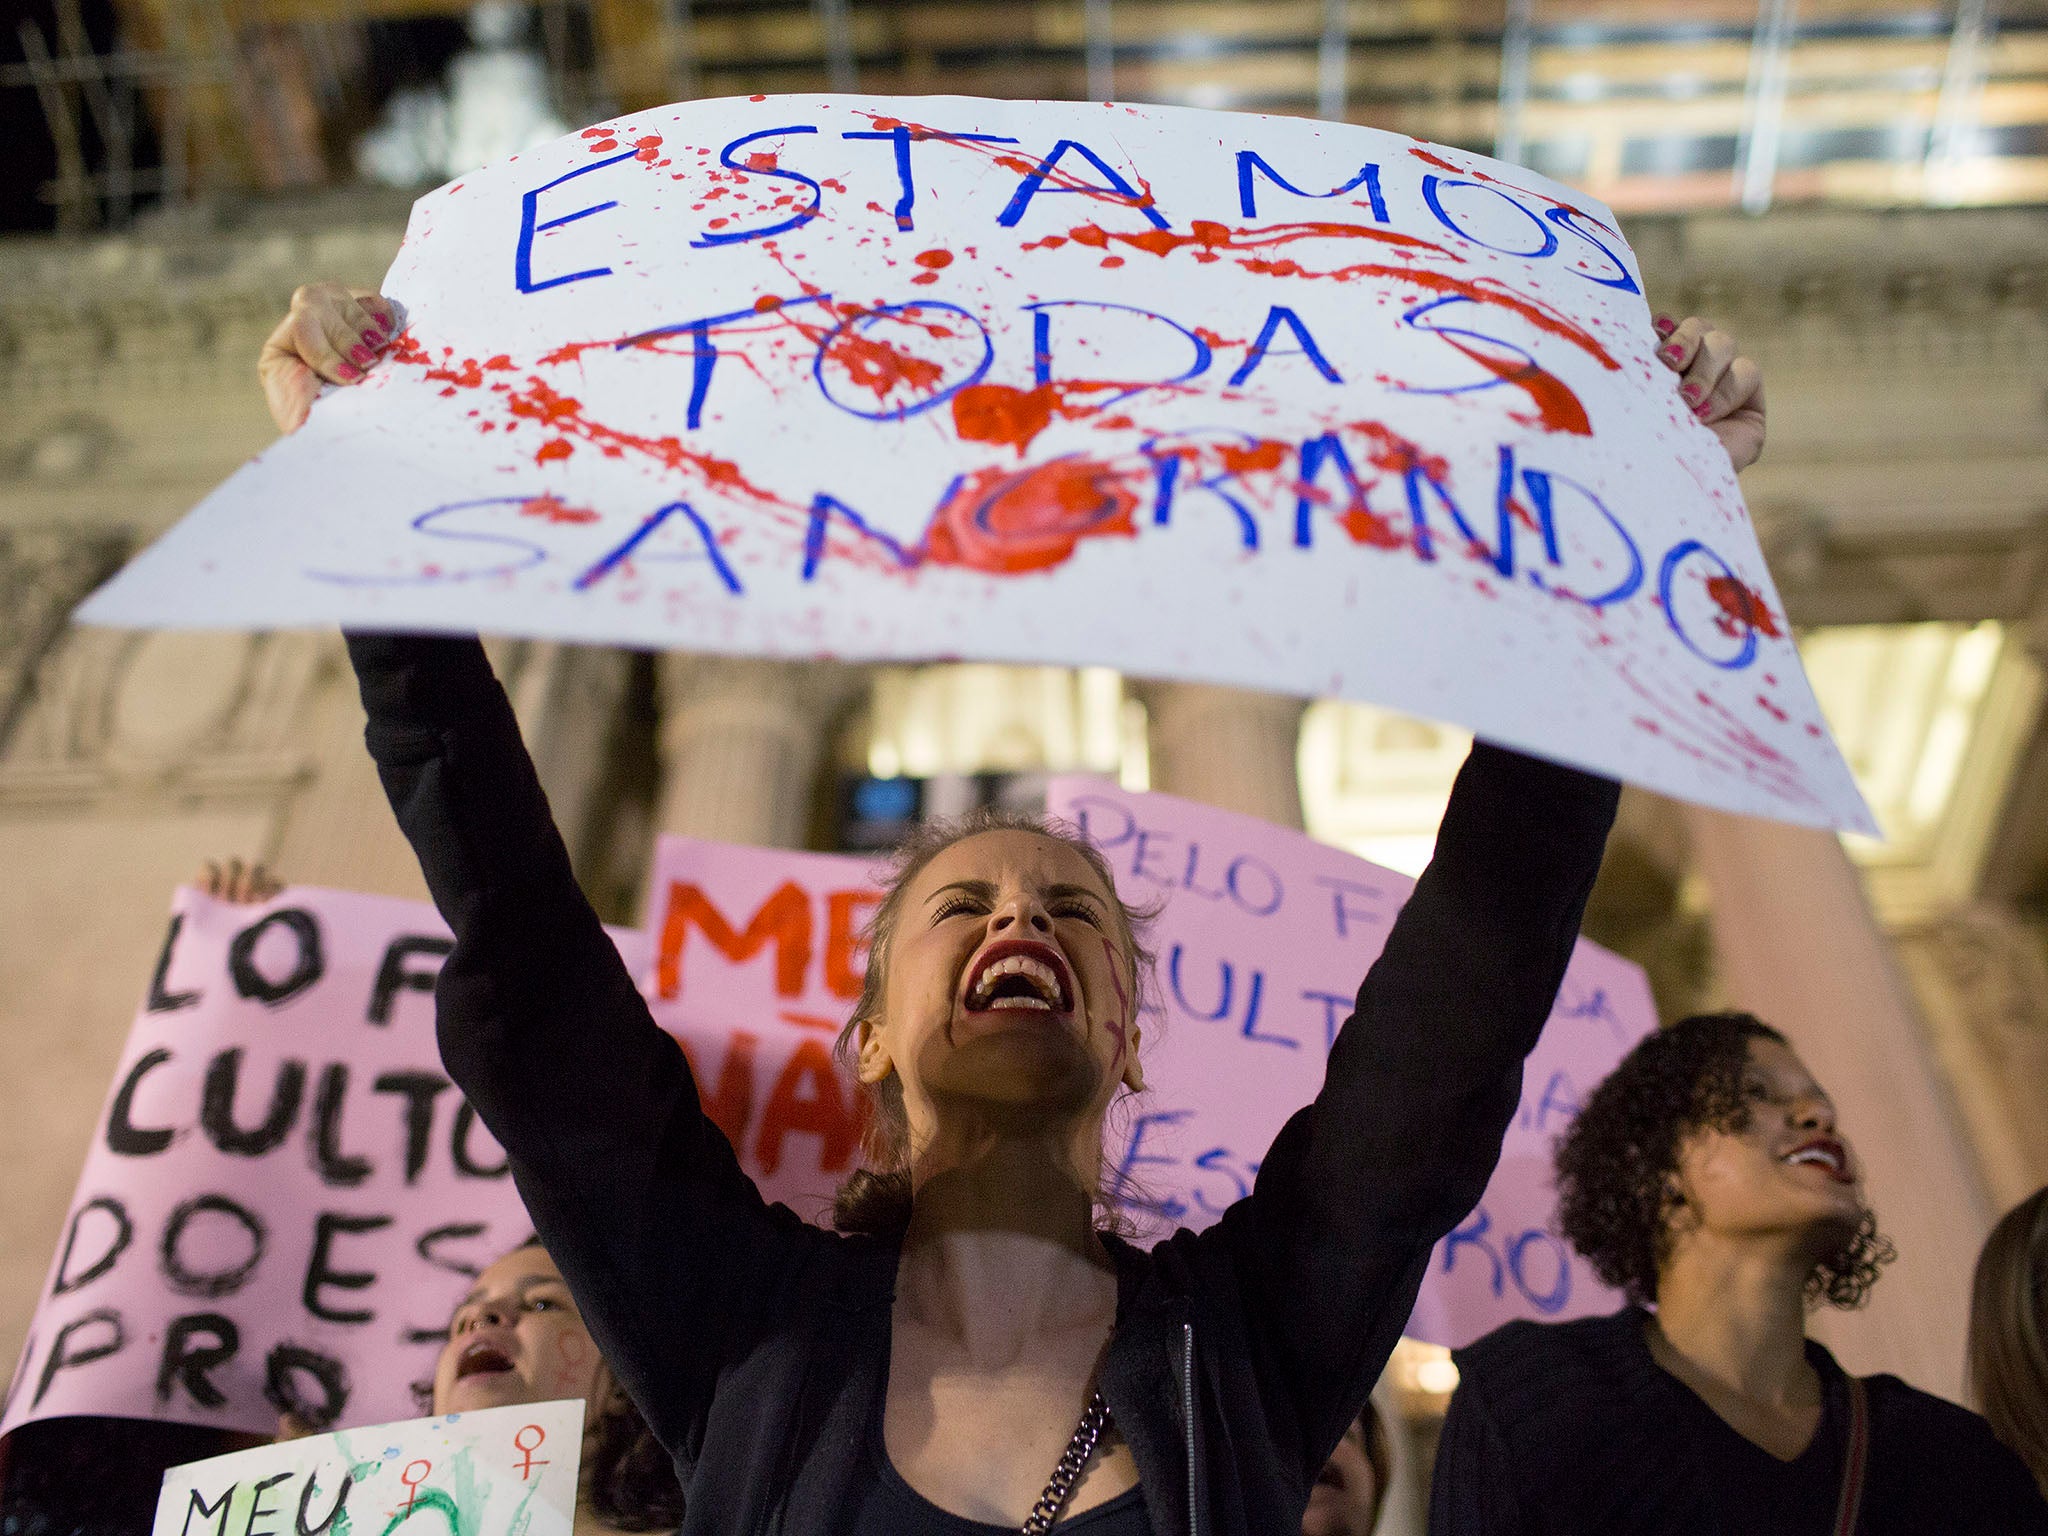 A protester in Rio de Janeiro holding a banner that reads: "We're all bleeding"